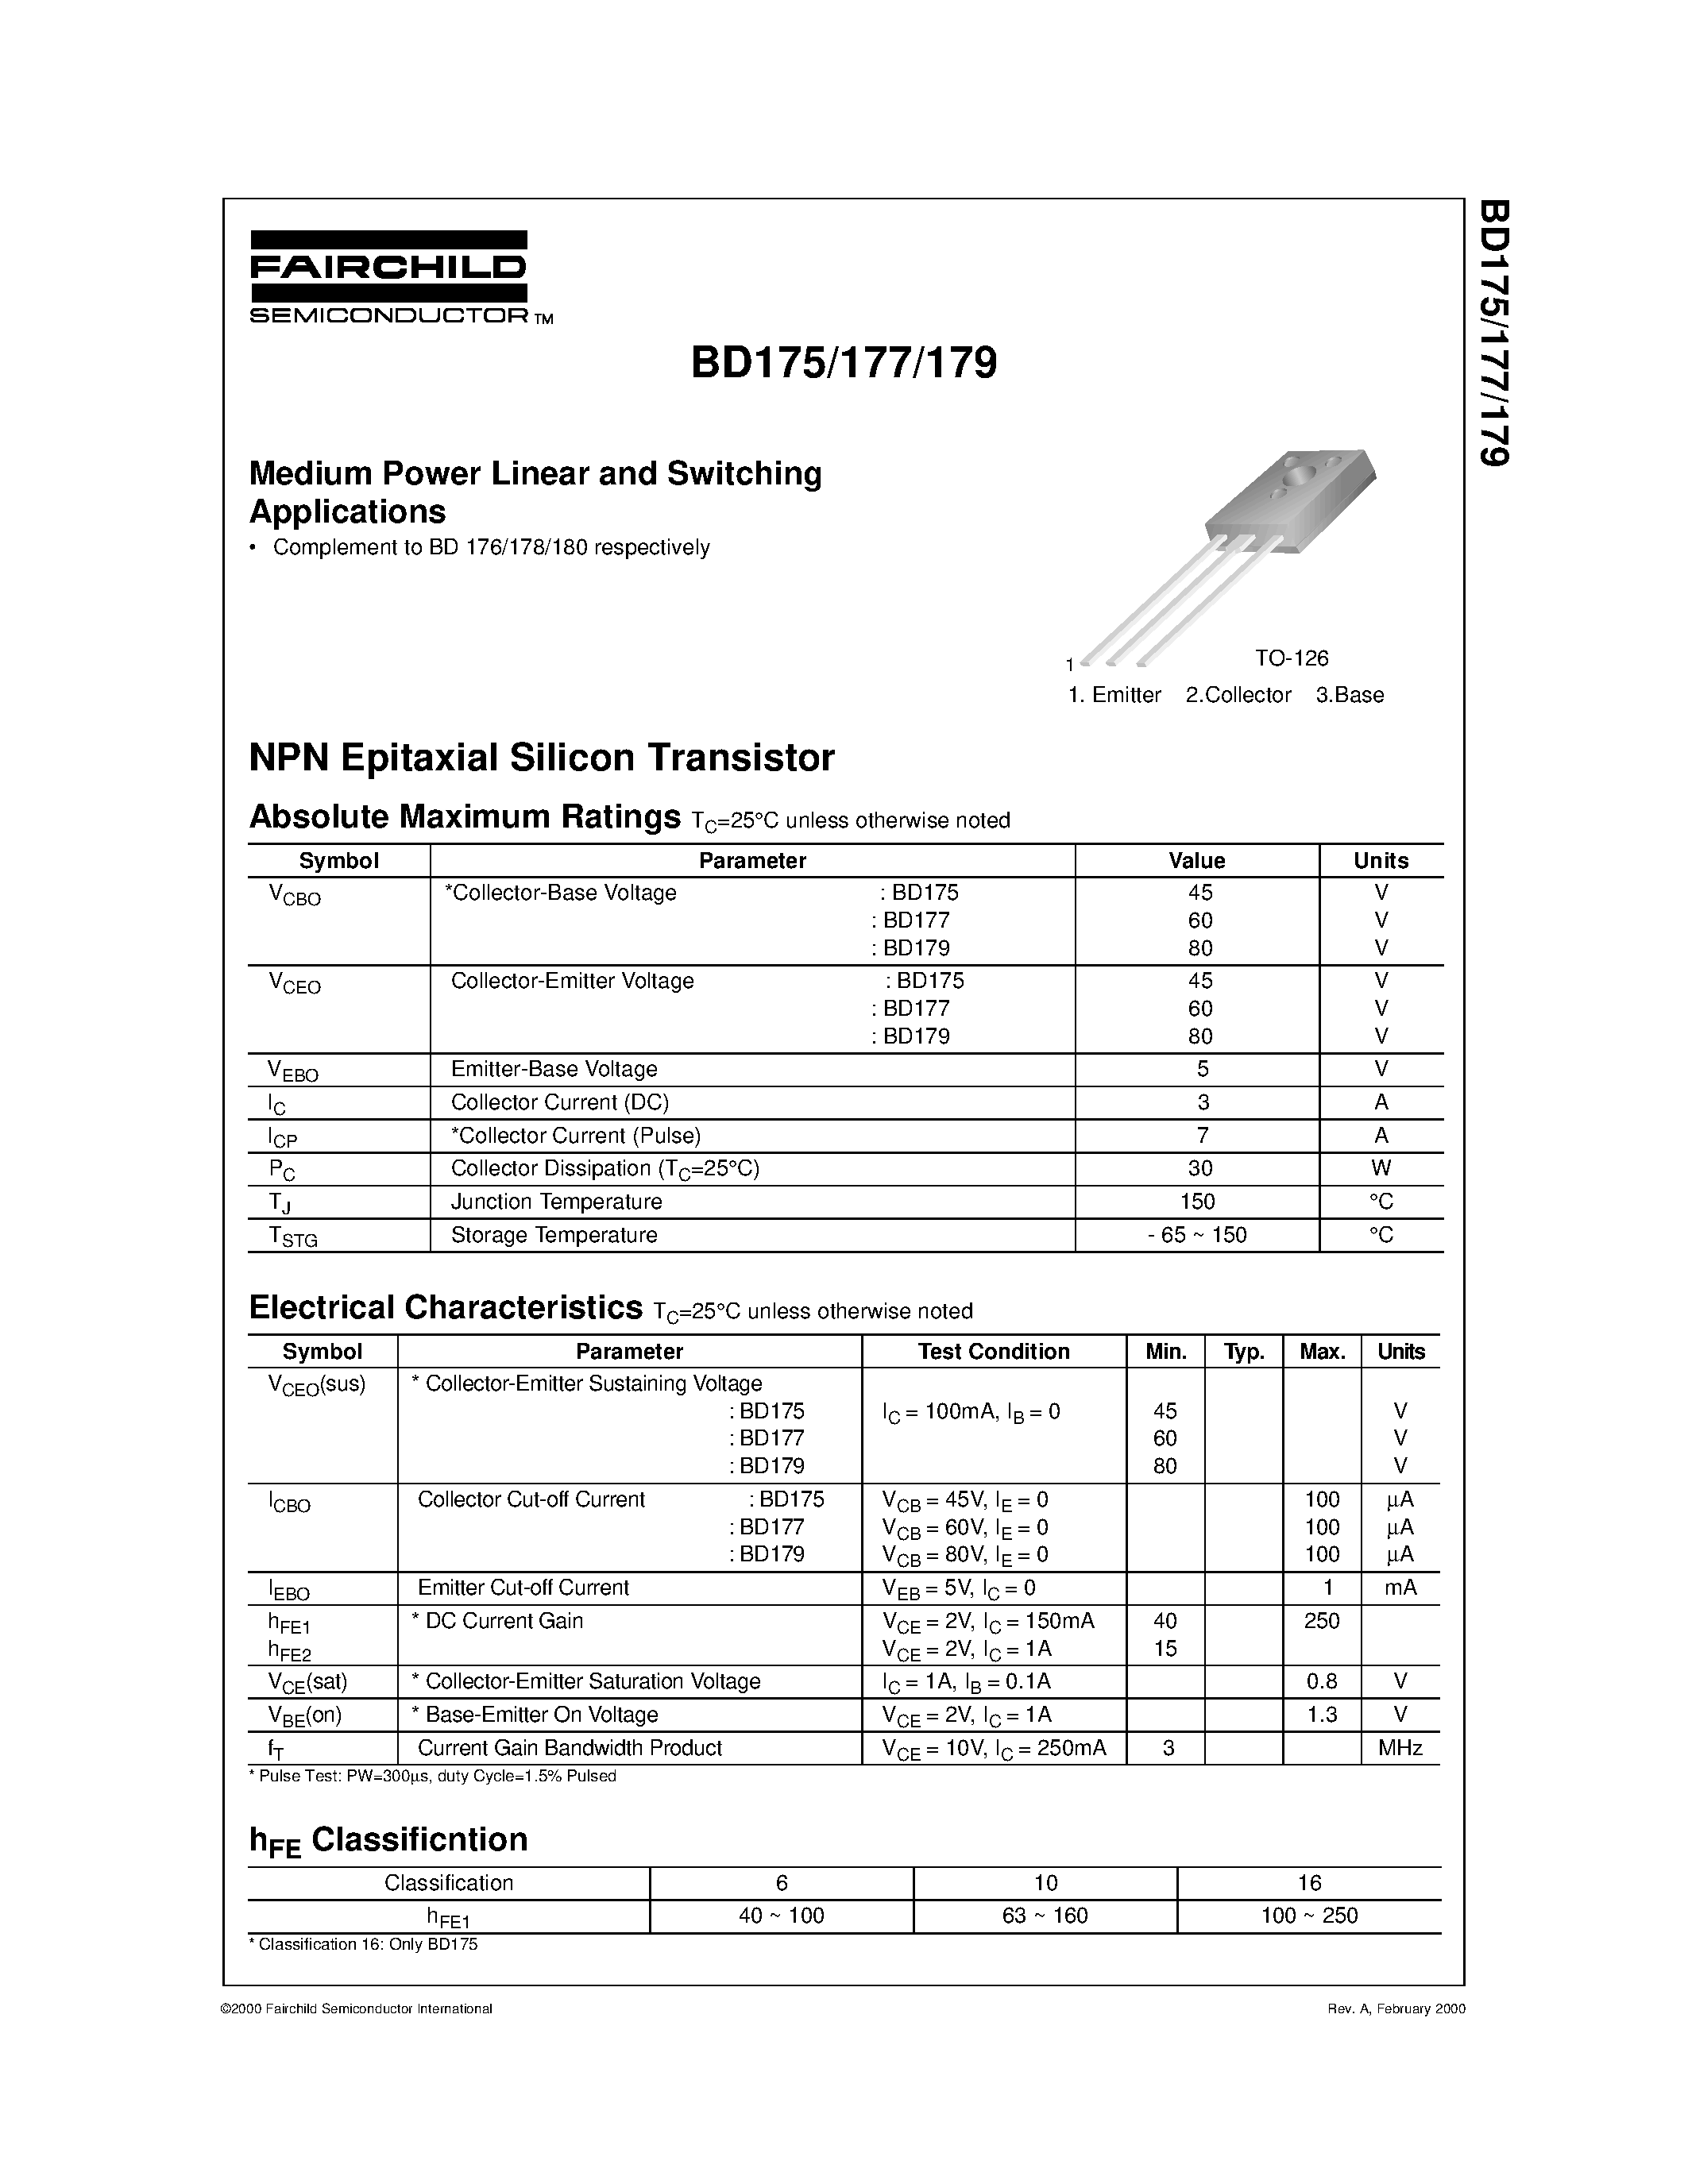 Datasheet BD179 - Medium Power Linear and Switching Applications page 1